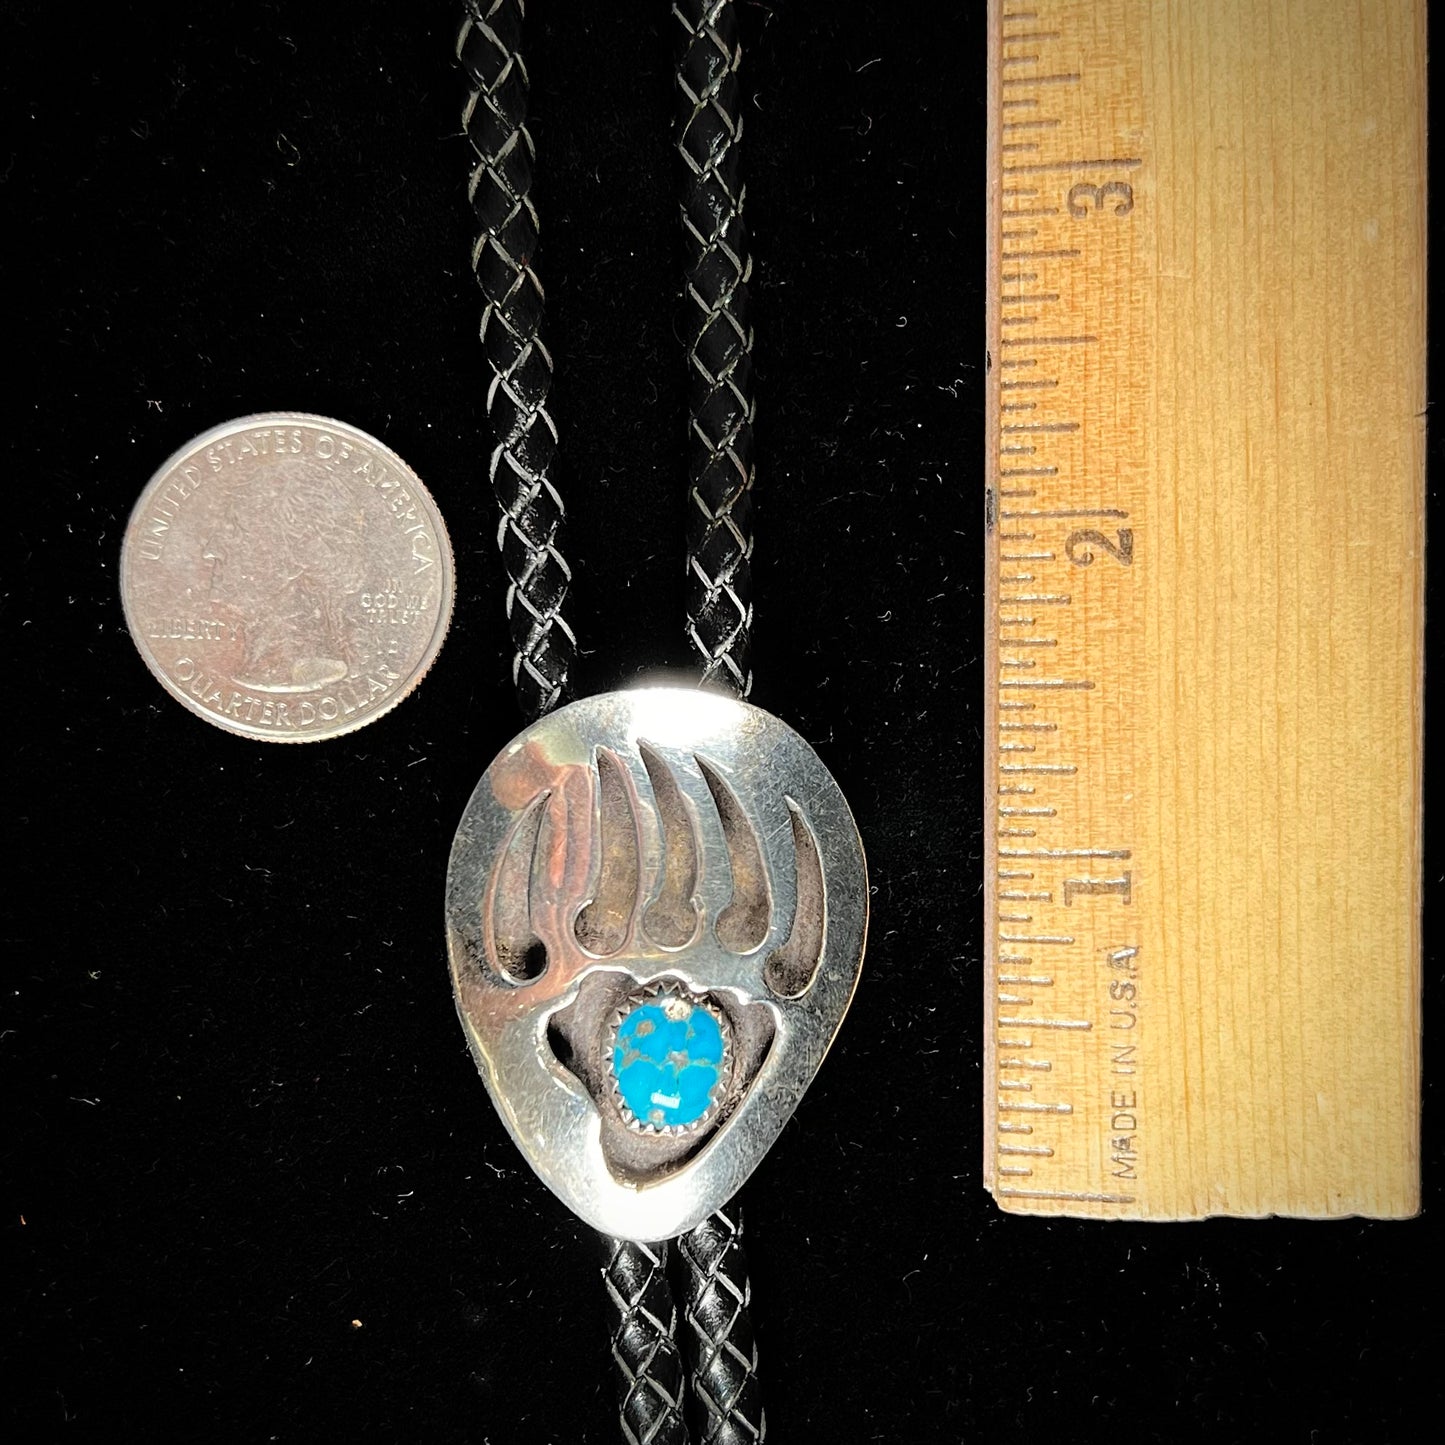 A sterling silver bolo tie in the shape of a bear's paw set with a Morenci turquoise stone.